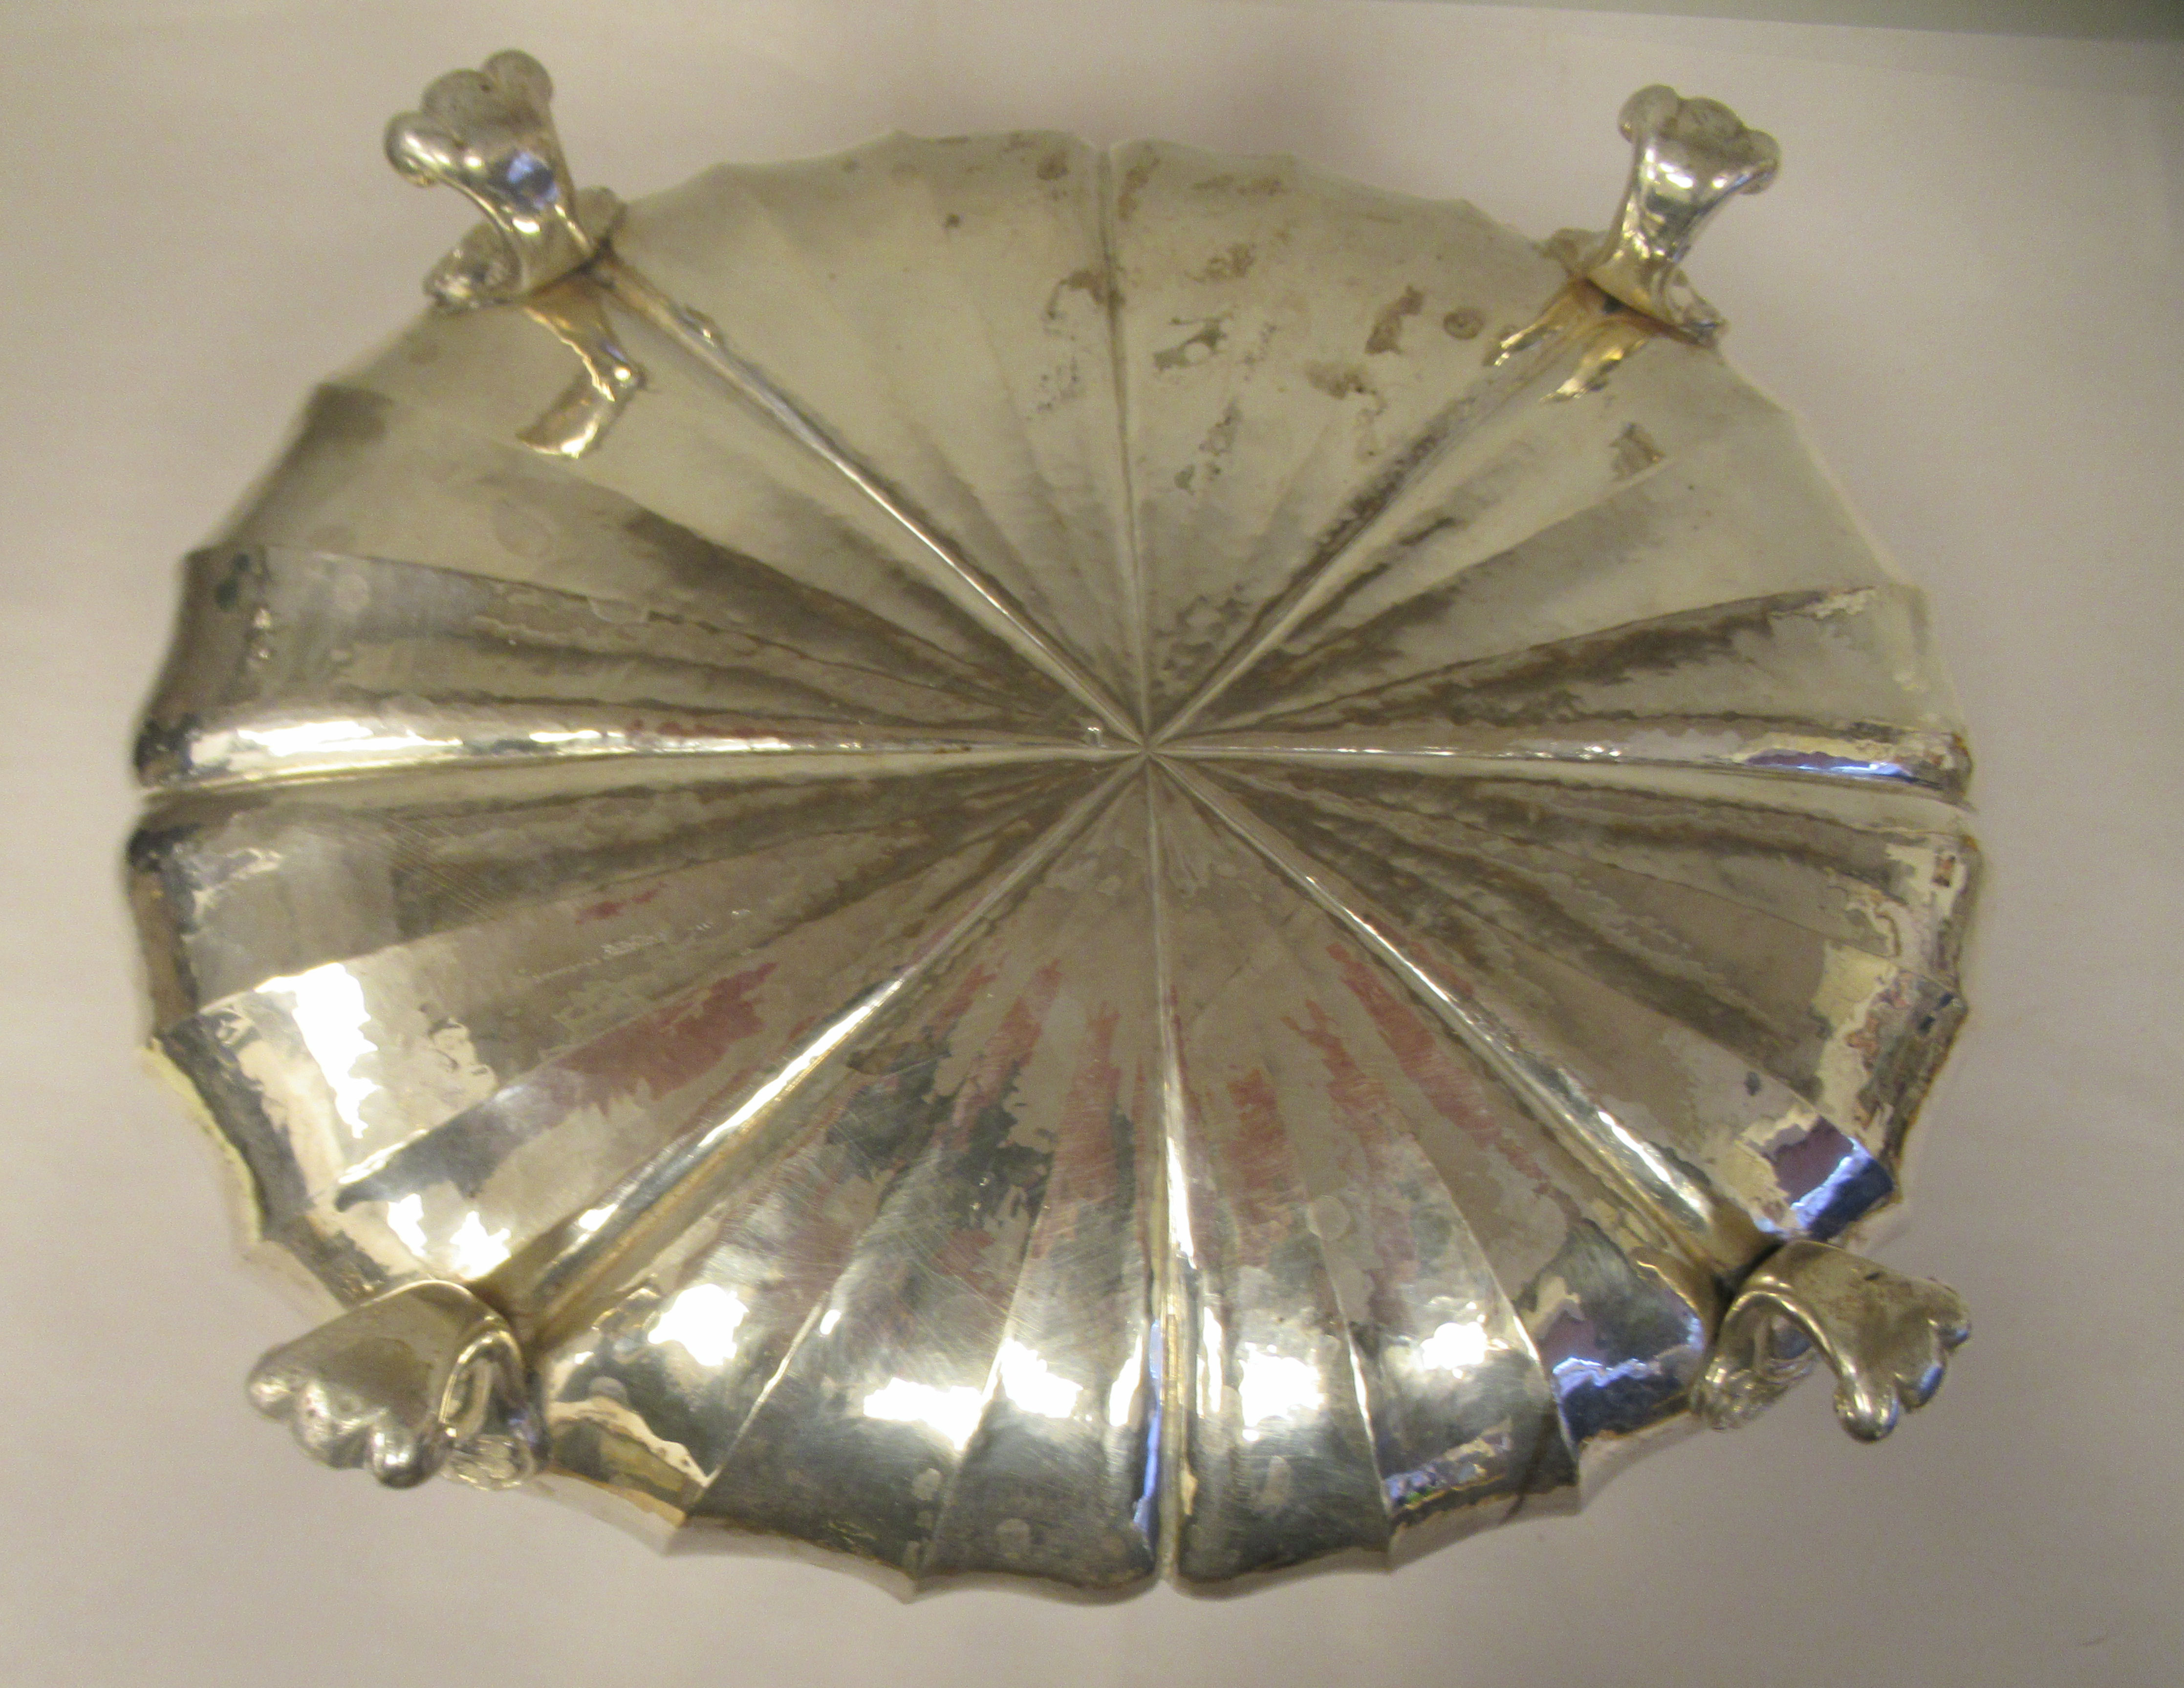 An Italian Gianmaria Buccellati silver oval, ogee shape jardiniere with fluted ornament, elevated on - Image 6 of 7